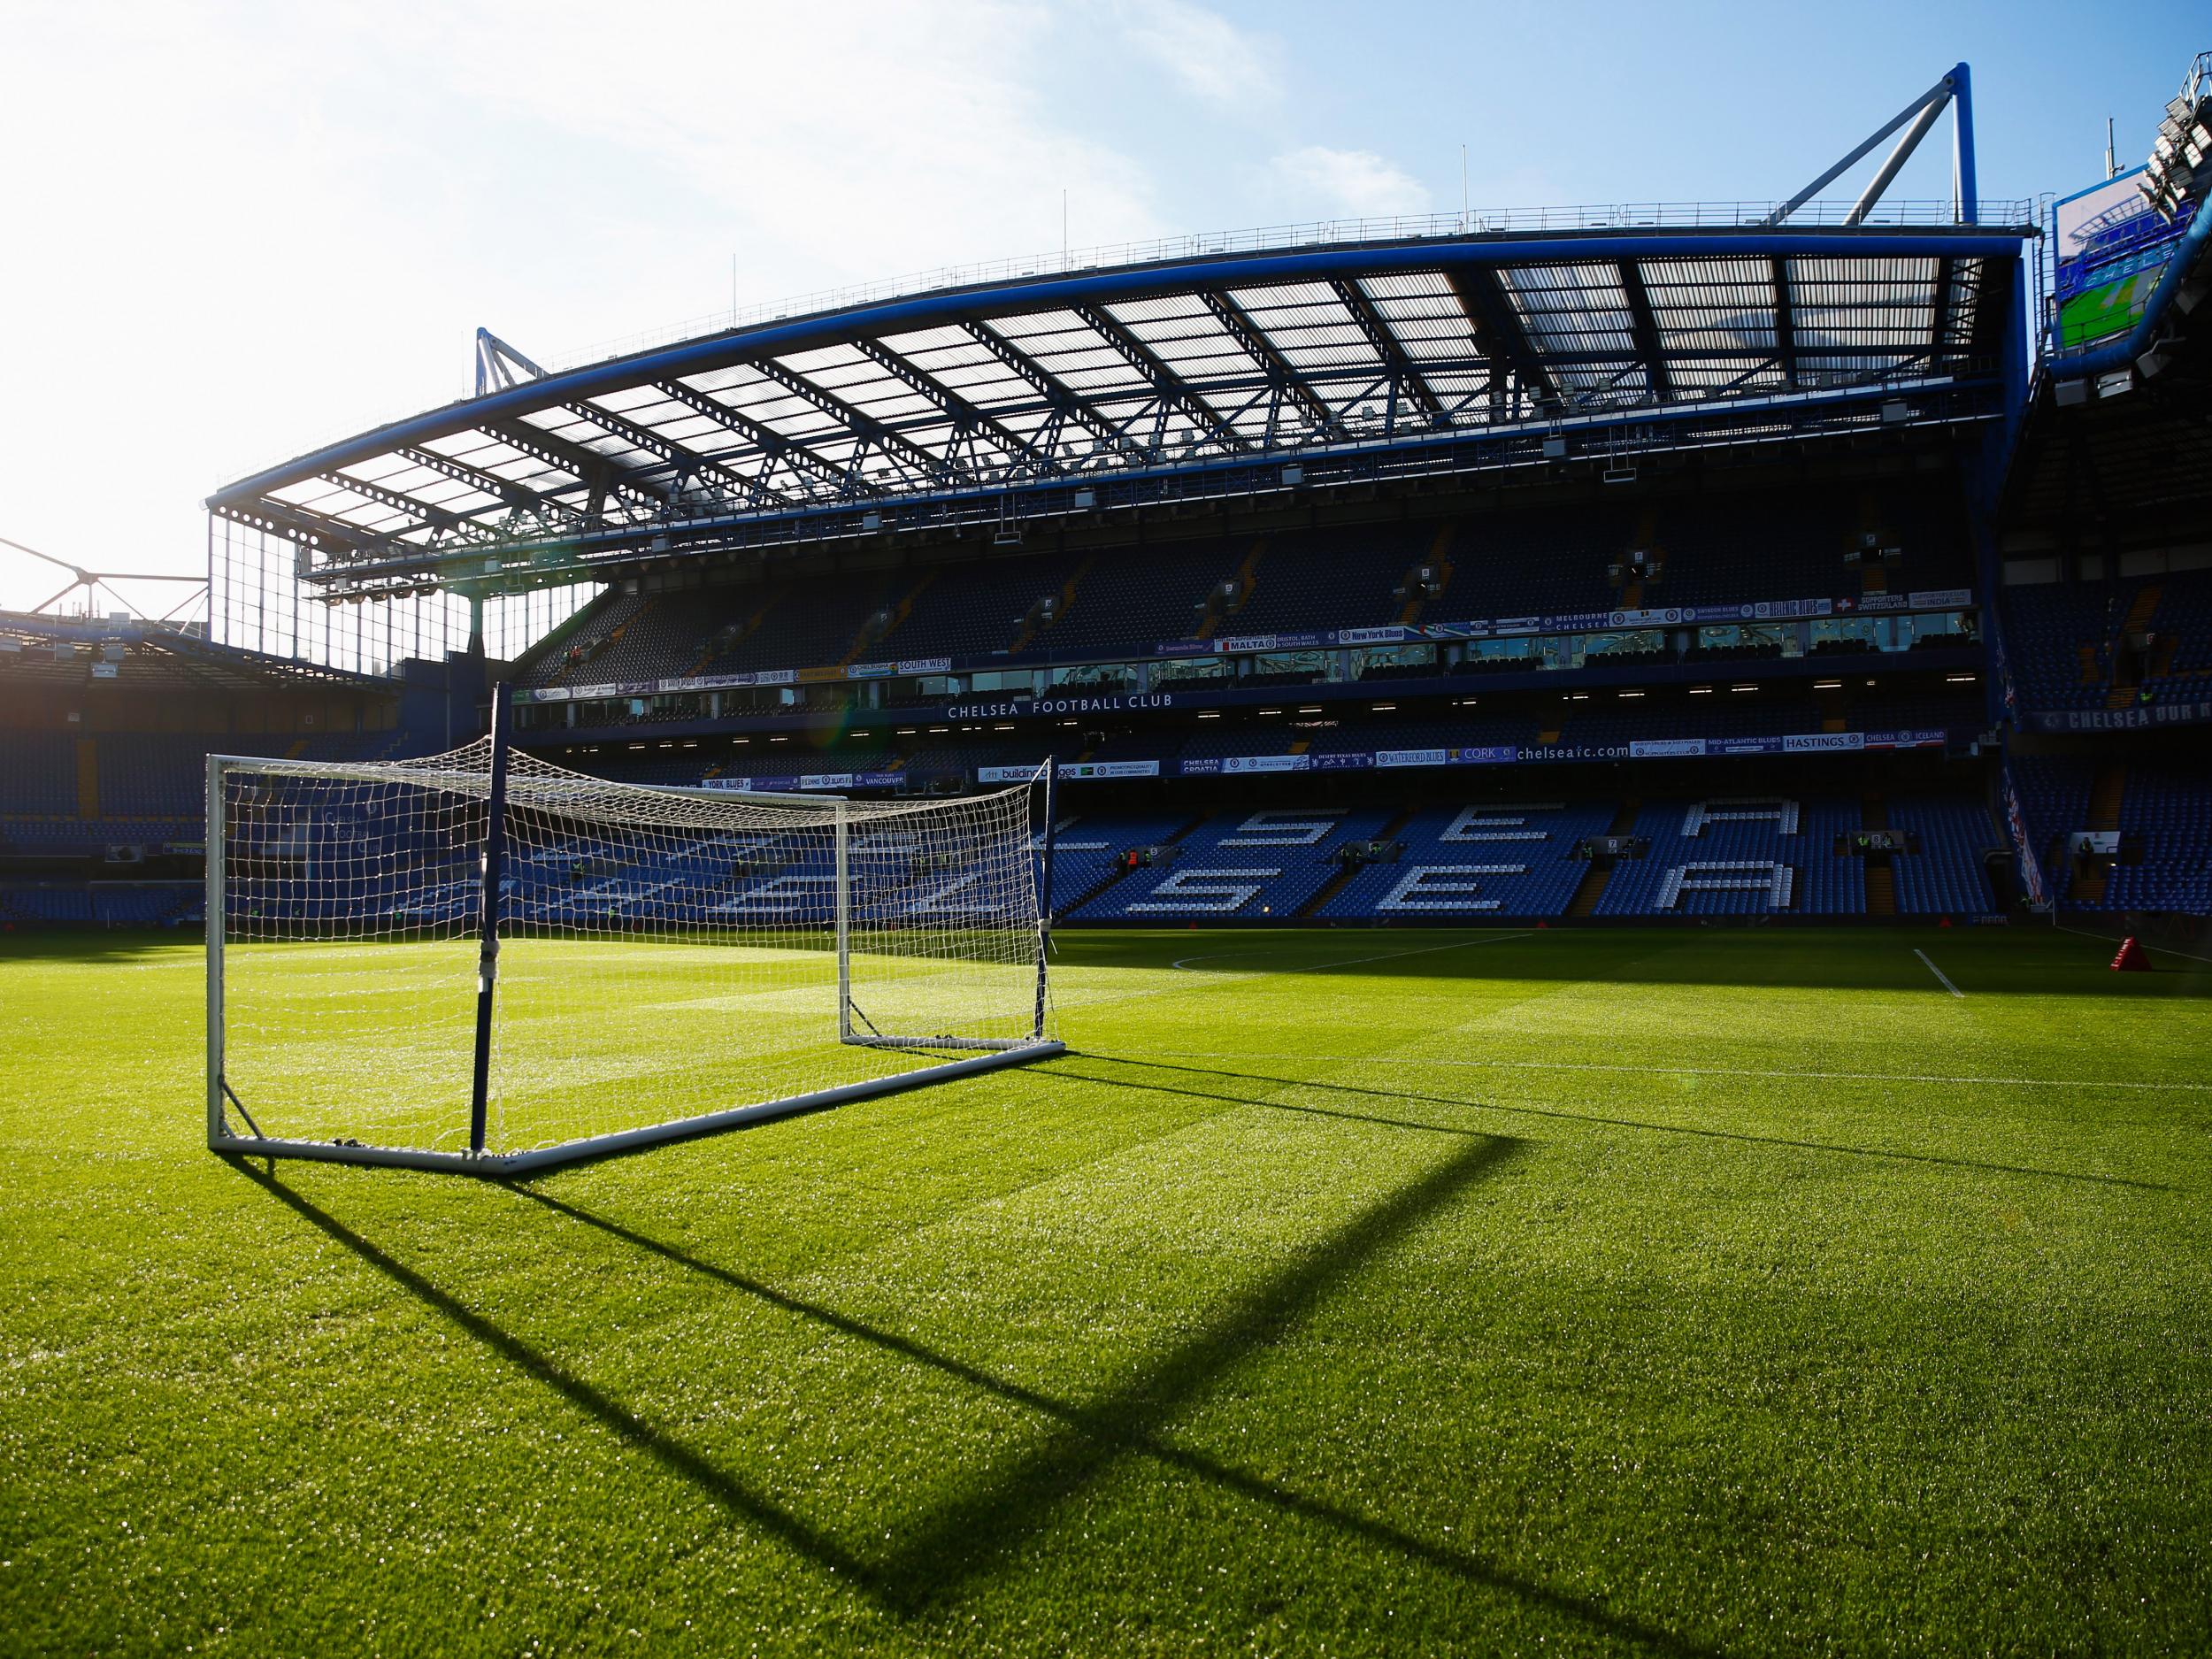 Stamford Bridge looks set to undergo a £500m revamp to expand its capacity to 60,000